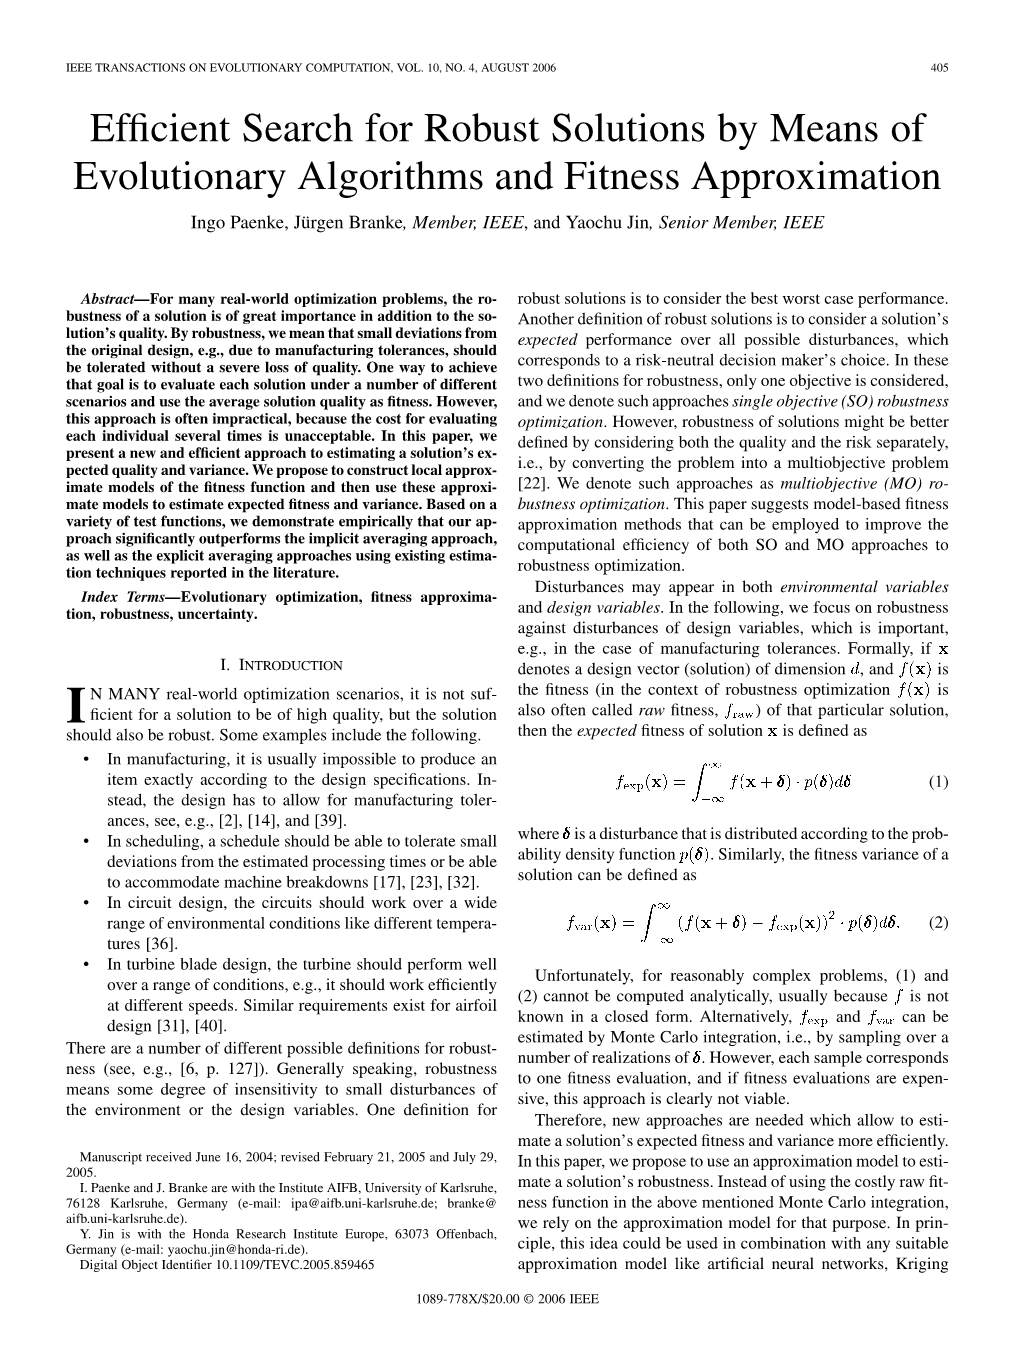 Efficient Search for Robust Solutions by Means of Evolutionary Algorithms and Fitness Approximation 407